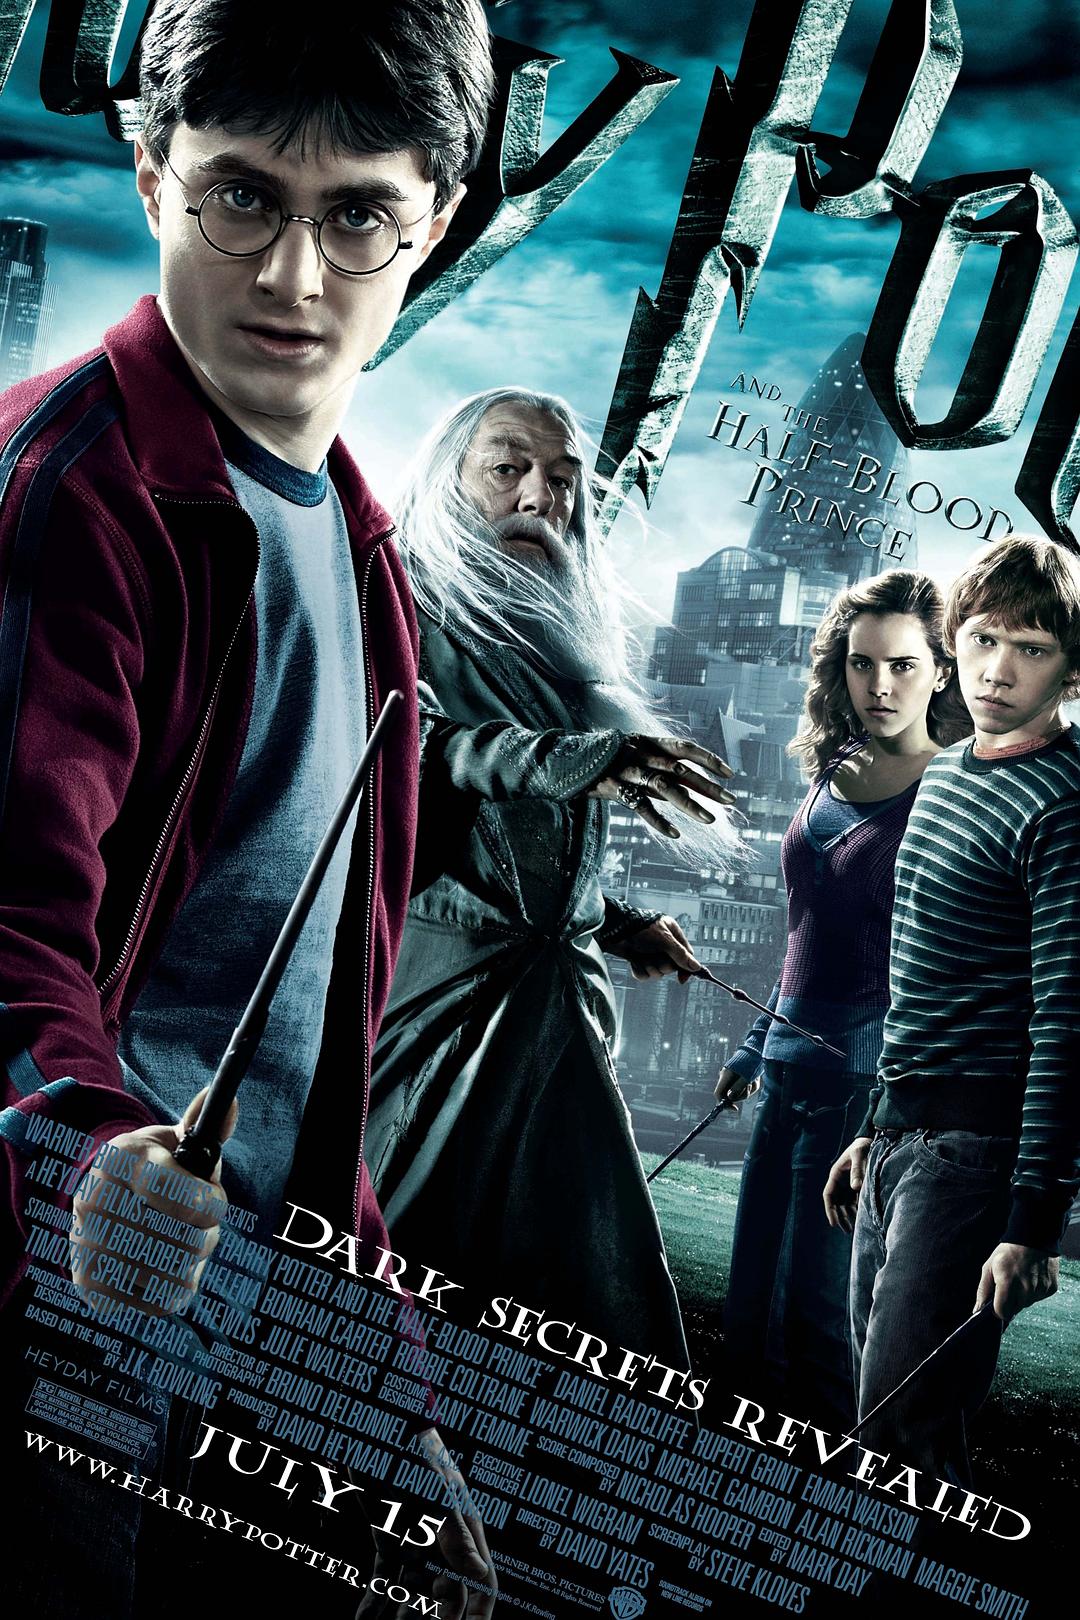 Ѫ Harry.Potter.and.the.Half.Blood.Prince.2009.1080p.BluRay.x264-METiS 1-1.png